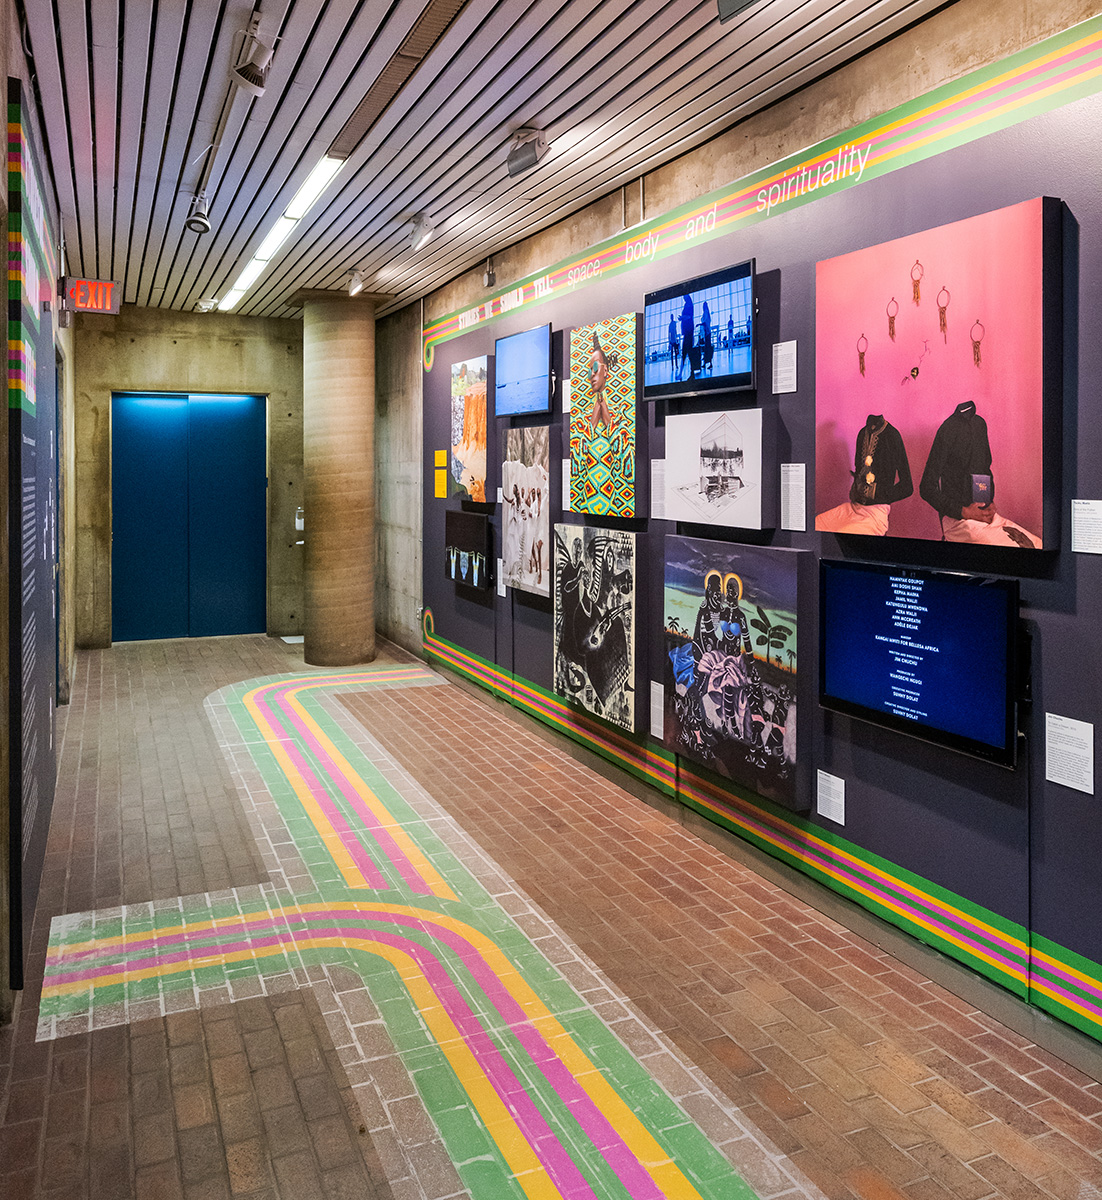 A view of the exhibit in Gund Hall showing a variety of colorful artwork on the walls and colorful stripes decorating the floor.